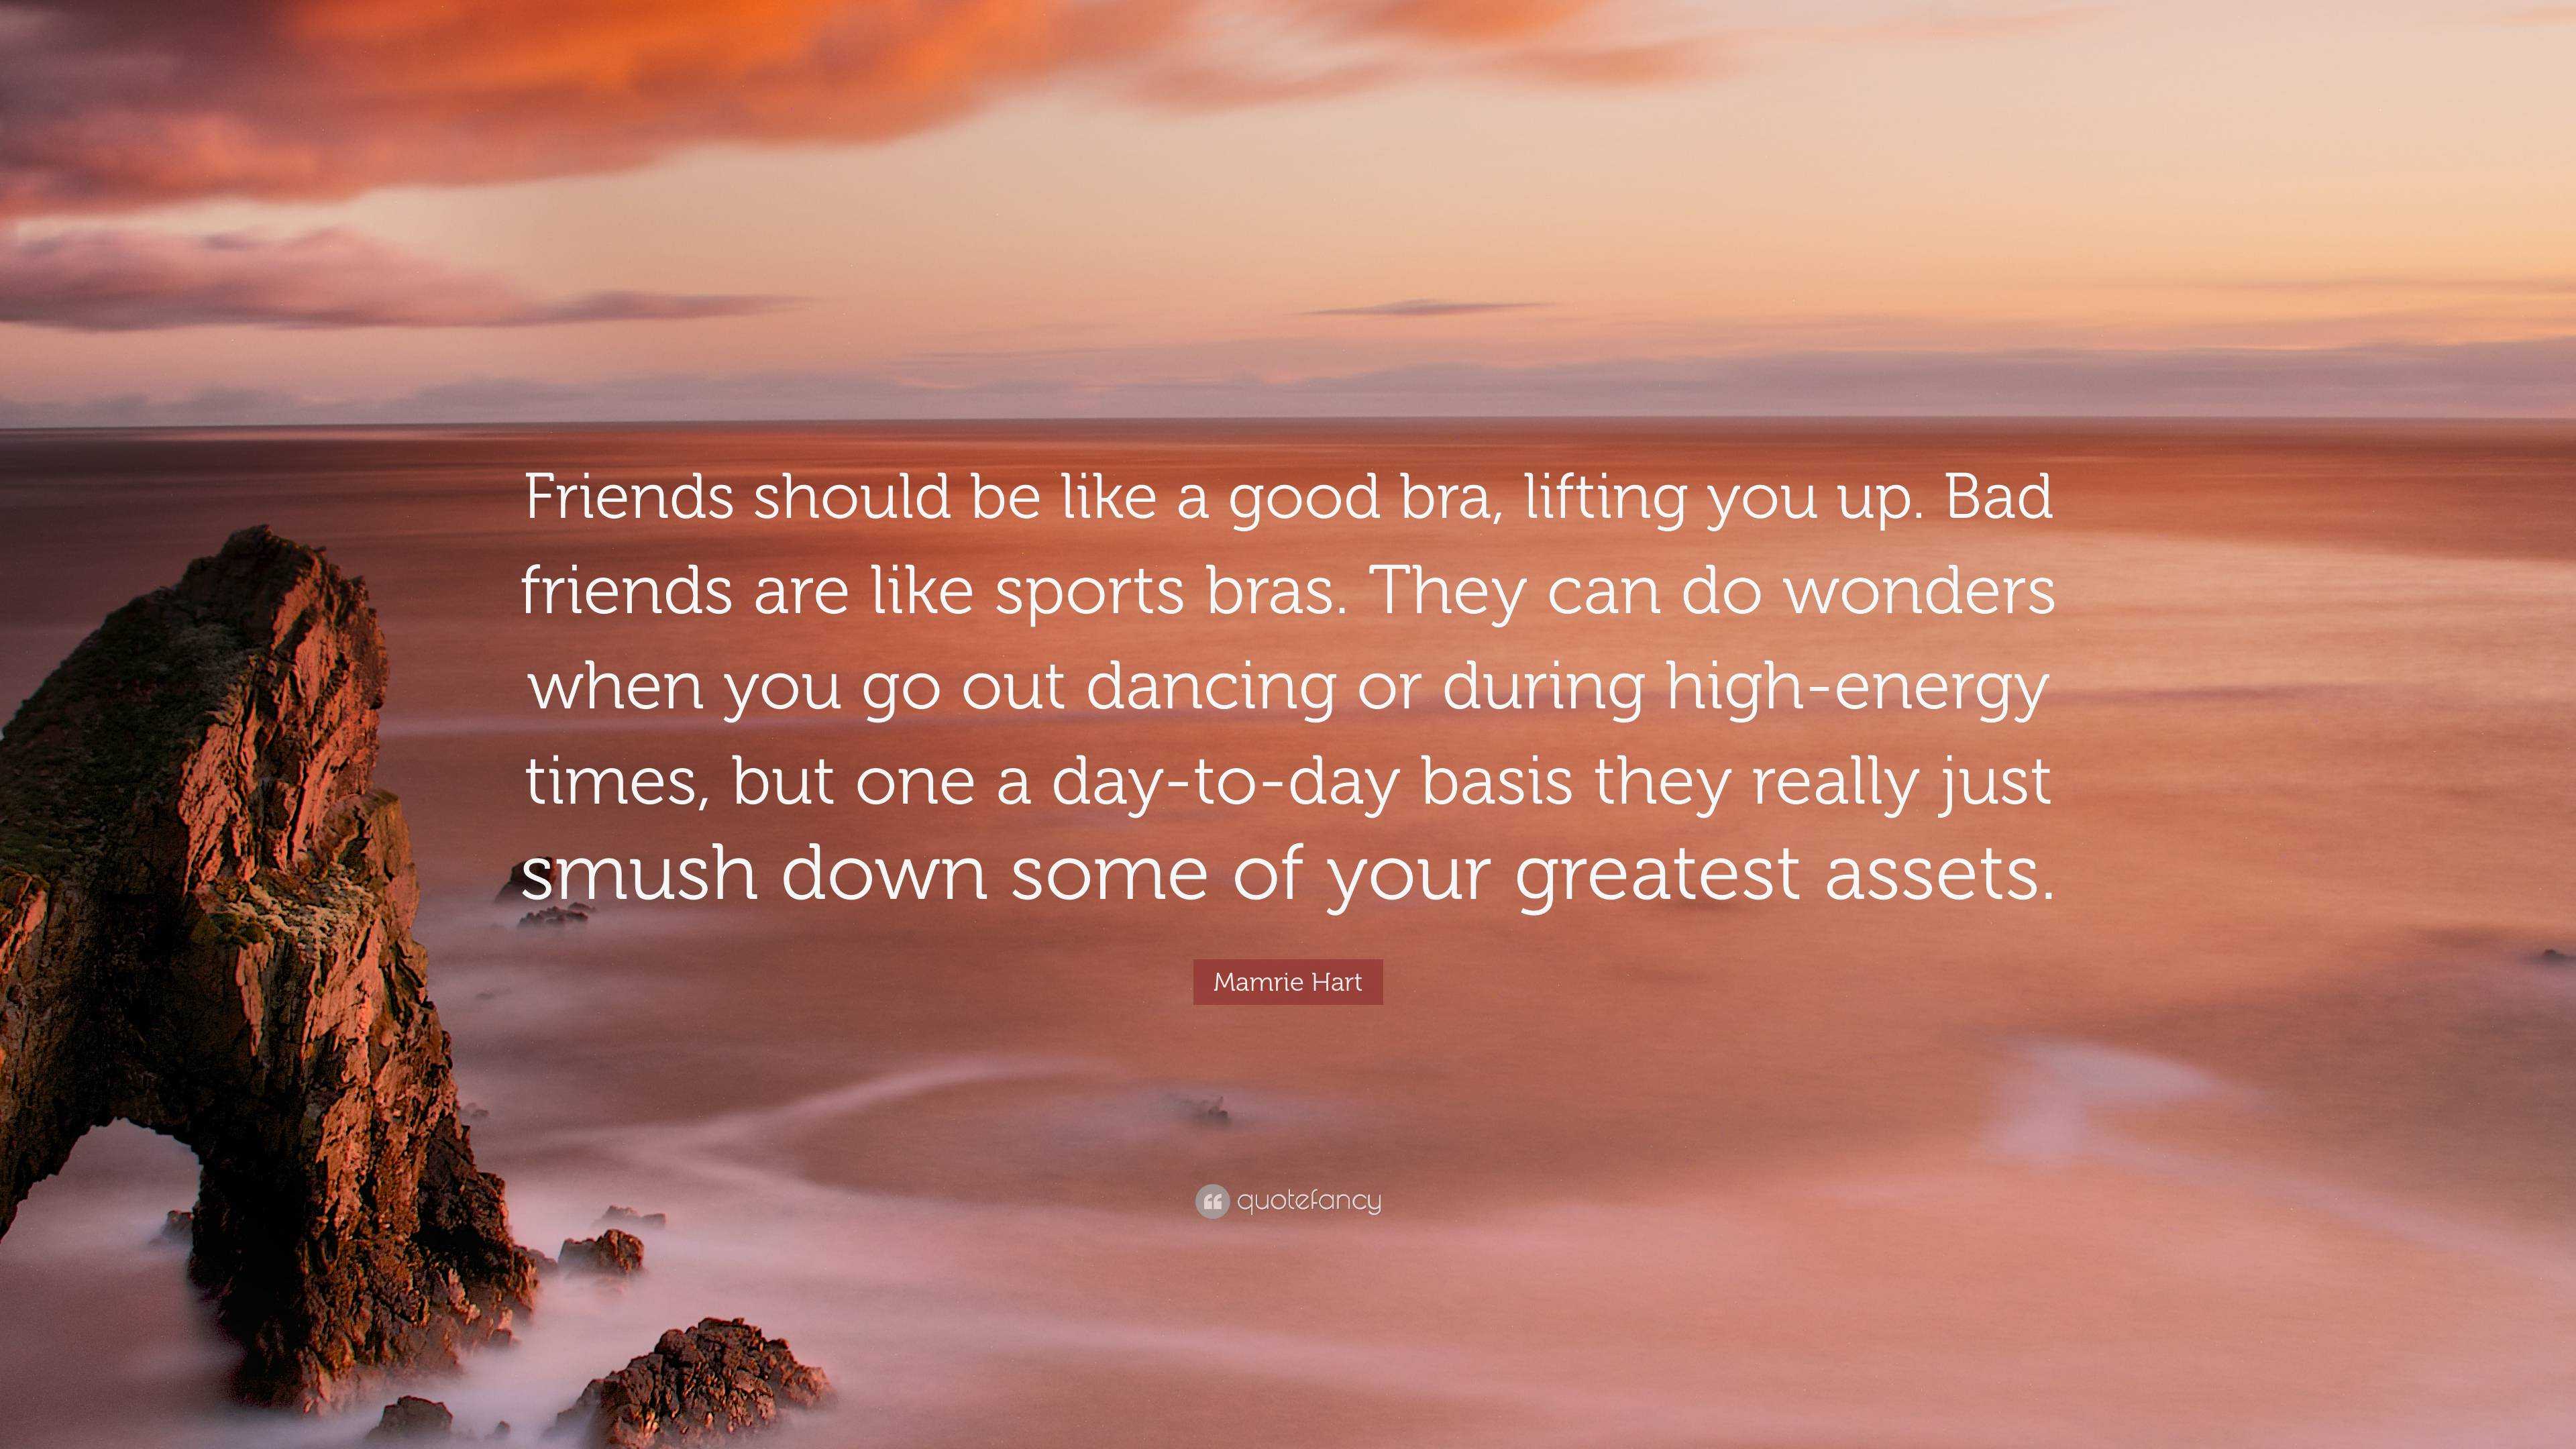 Mamrie Hart Quote: “Friends should be like a good bra, lifting you